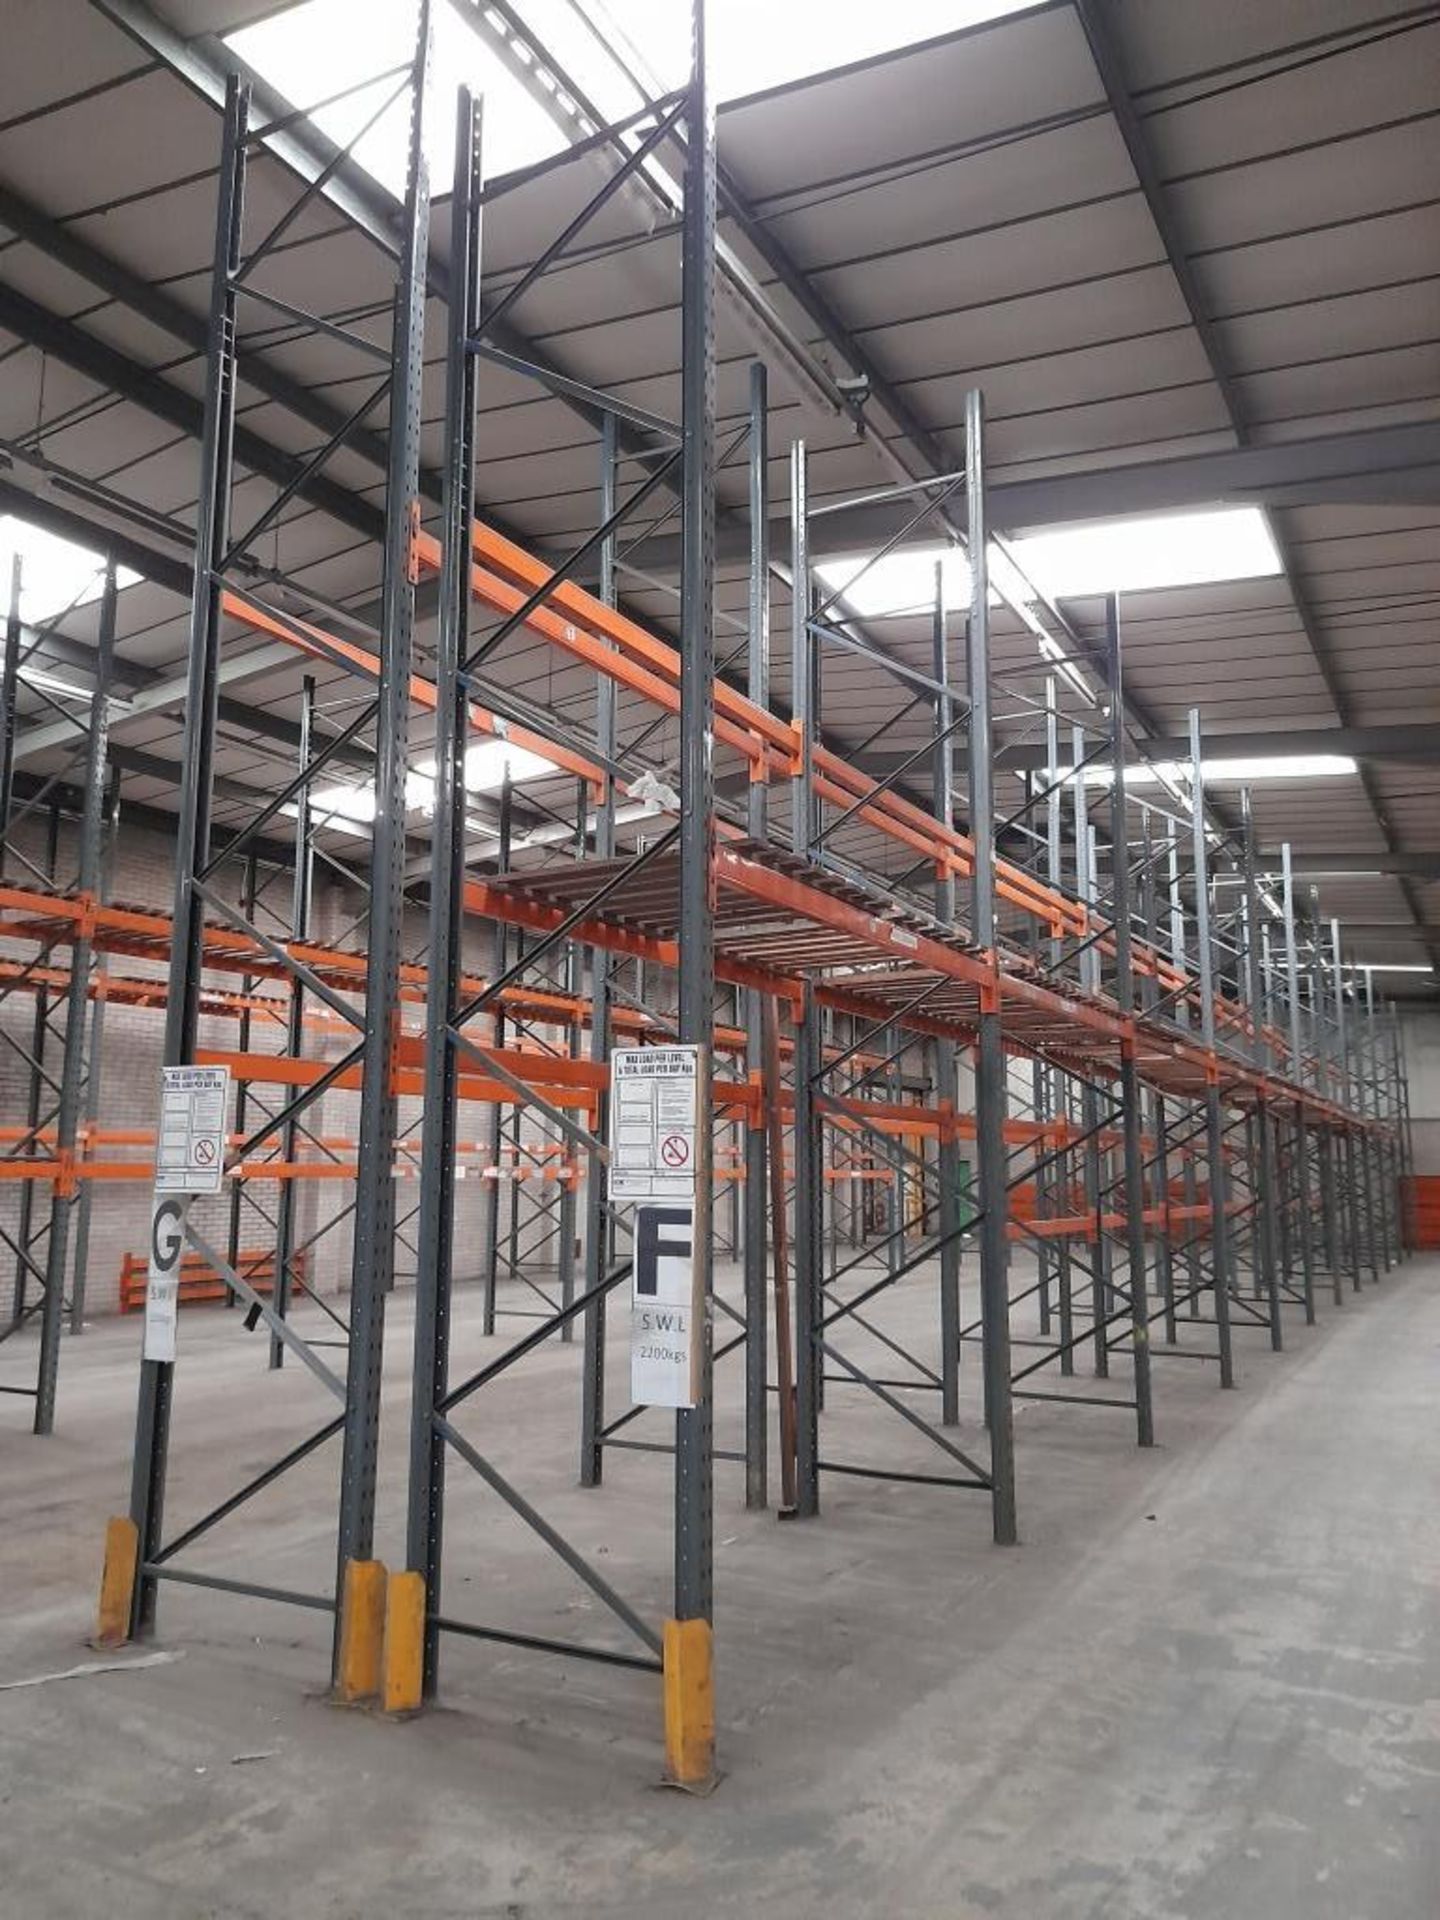 50 bays of DEXION industrial pallet racking, heigh - Image 7 of 11